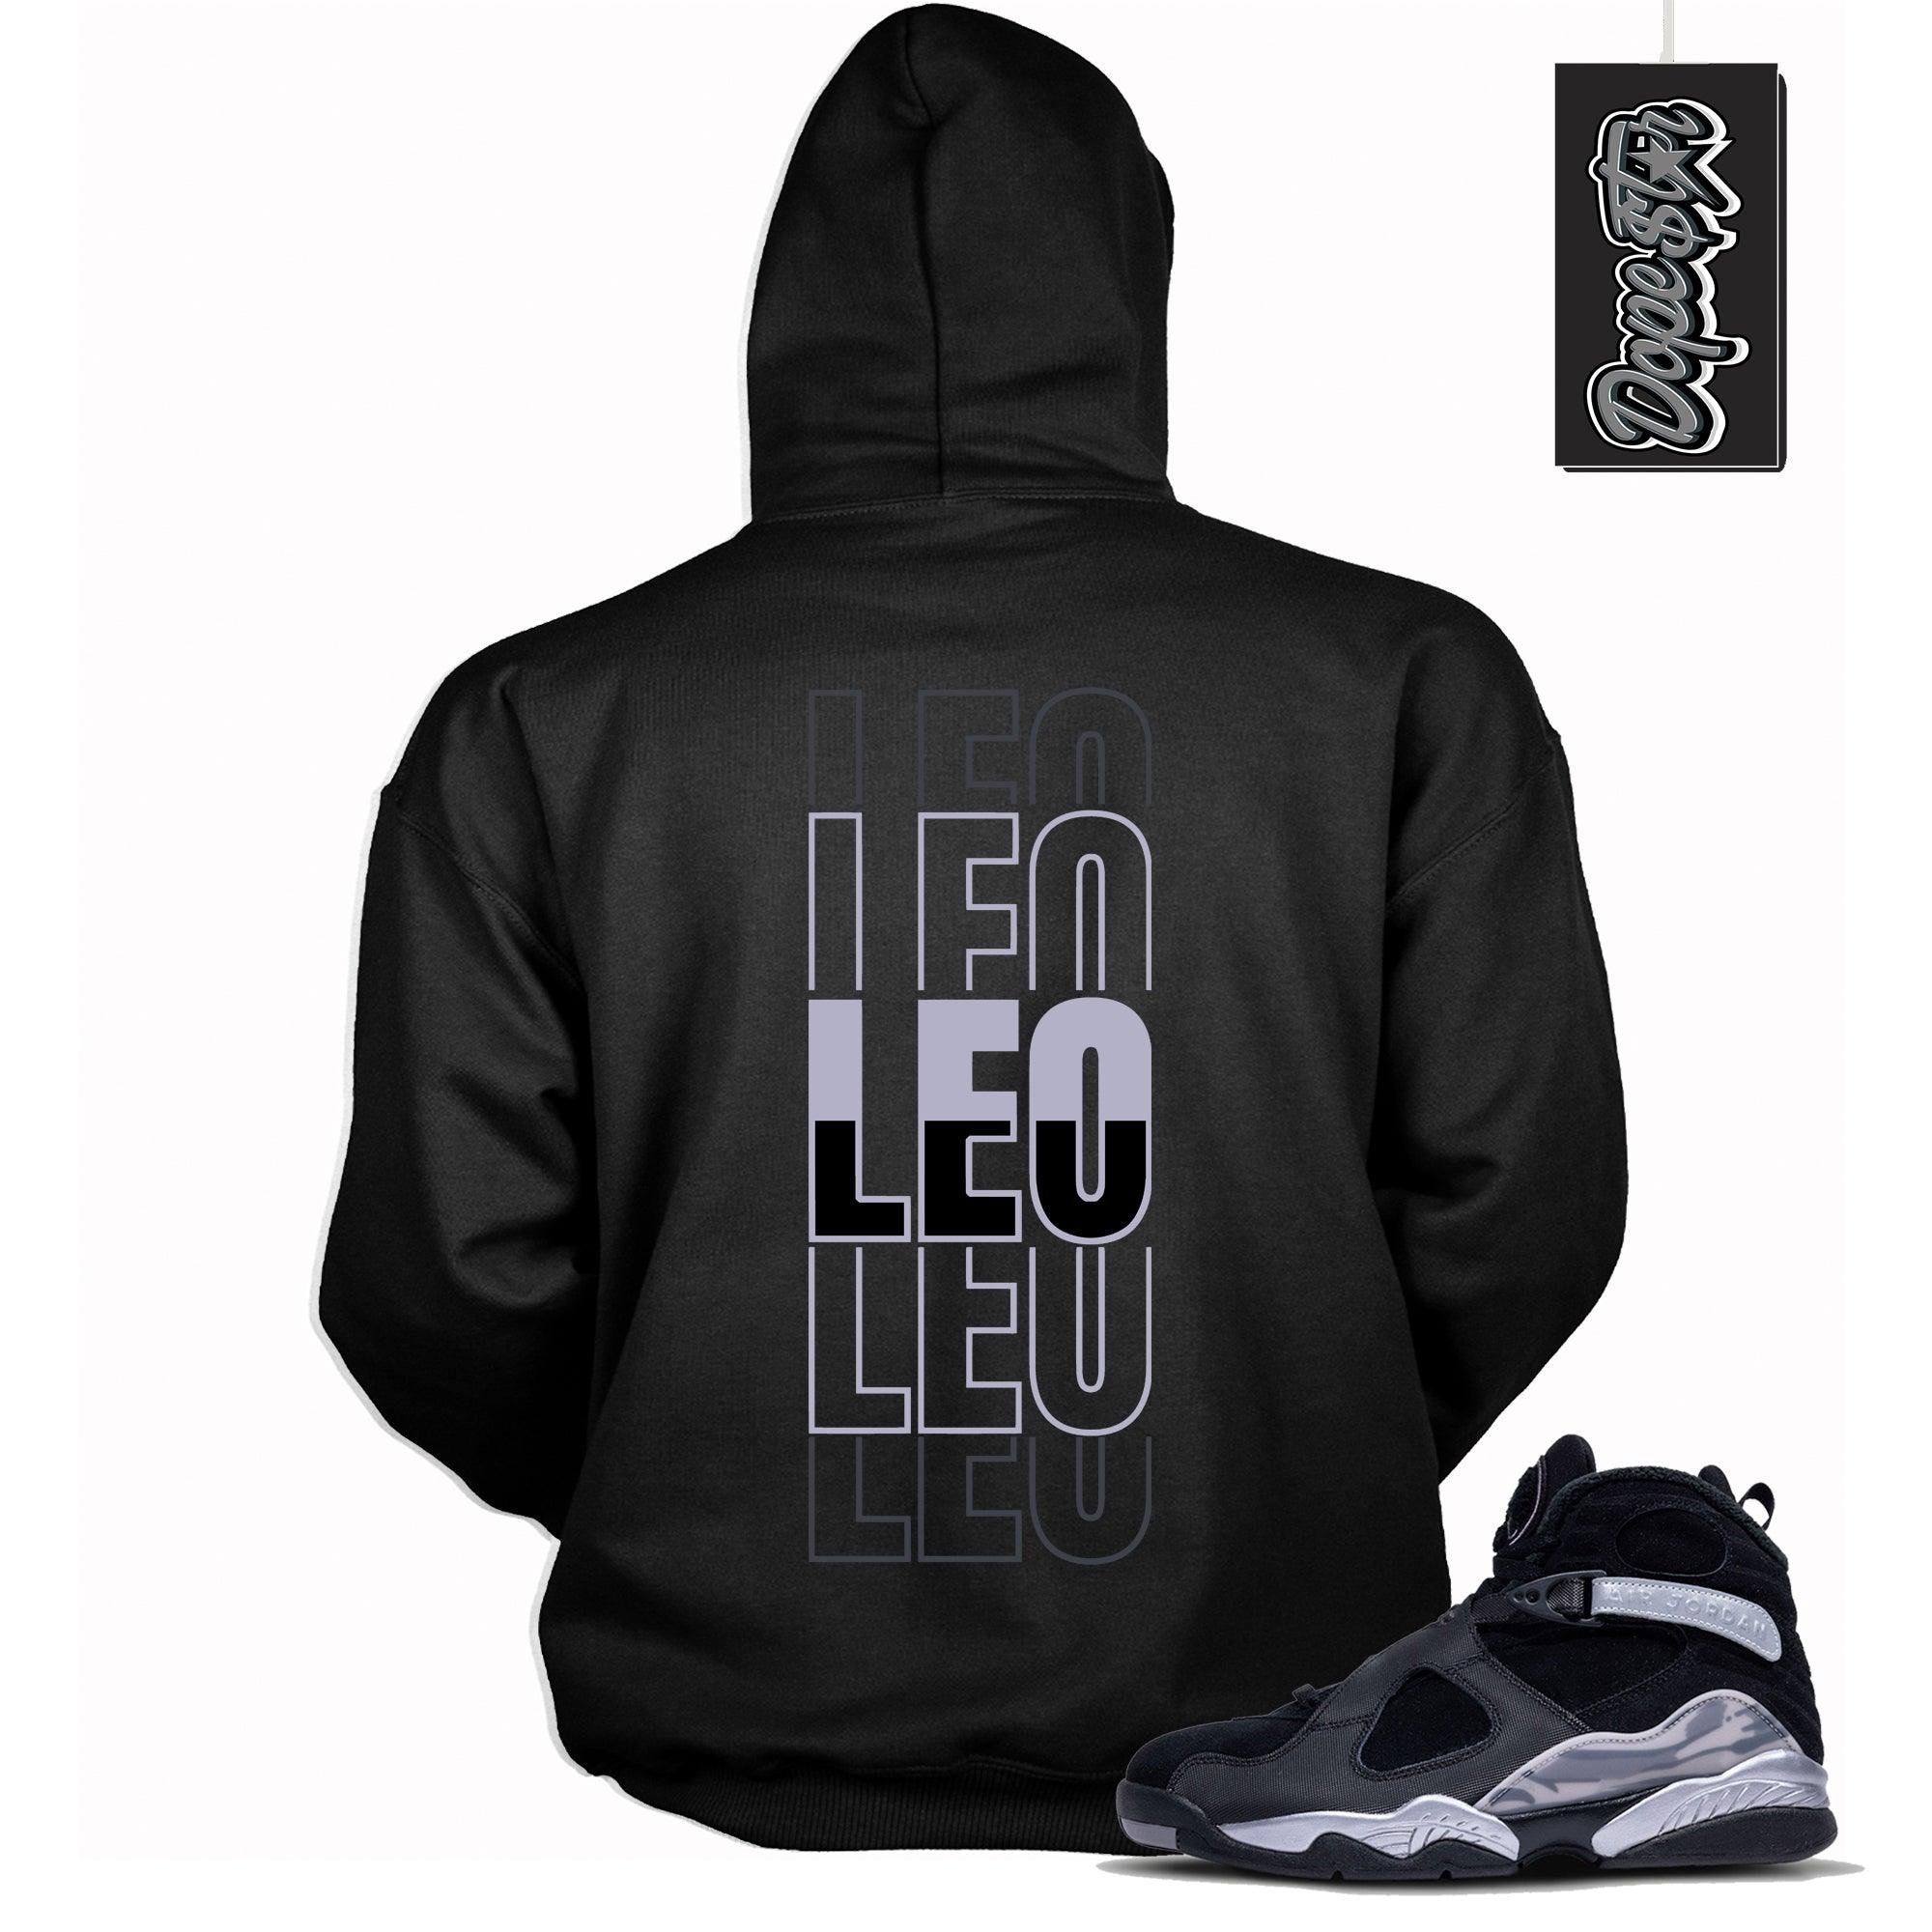 Cool Black Graphic Hoodie with “ LEO “ print, that perfectly matches Air Jordan 8 Winterized  sneakers